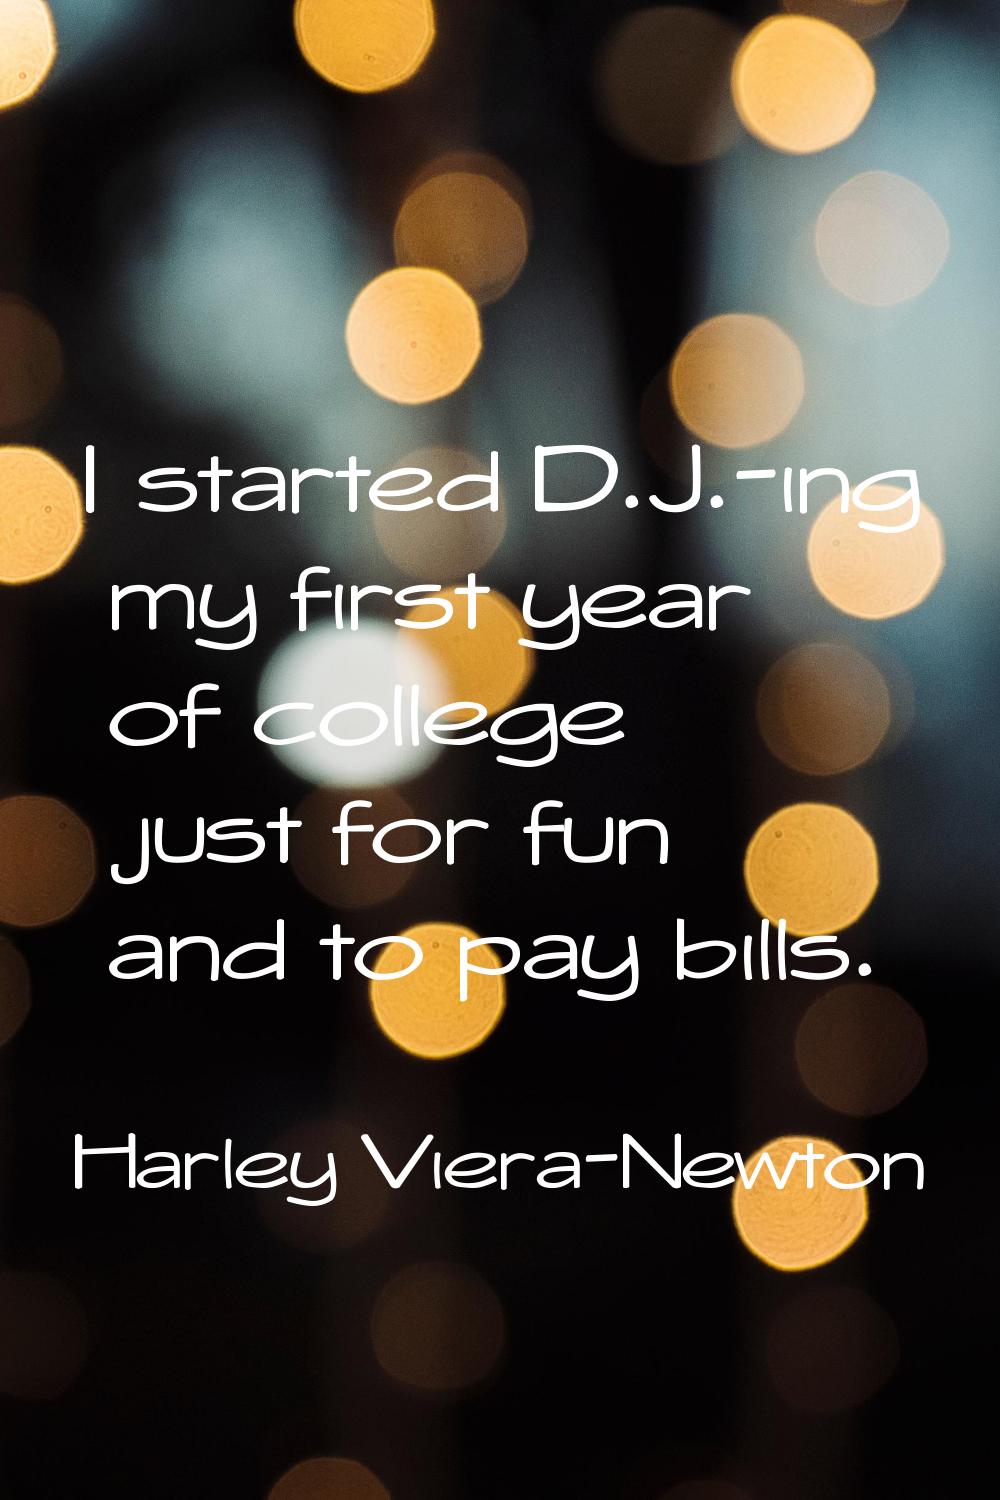 I started D.J.-ing my first year of college just for fun and to pay bills.